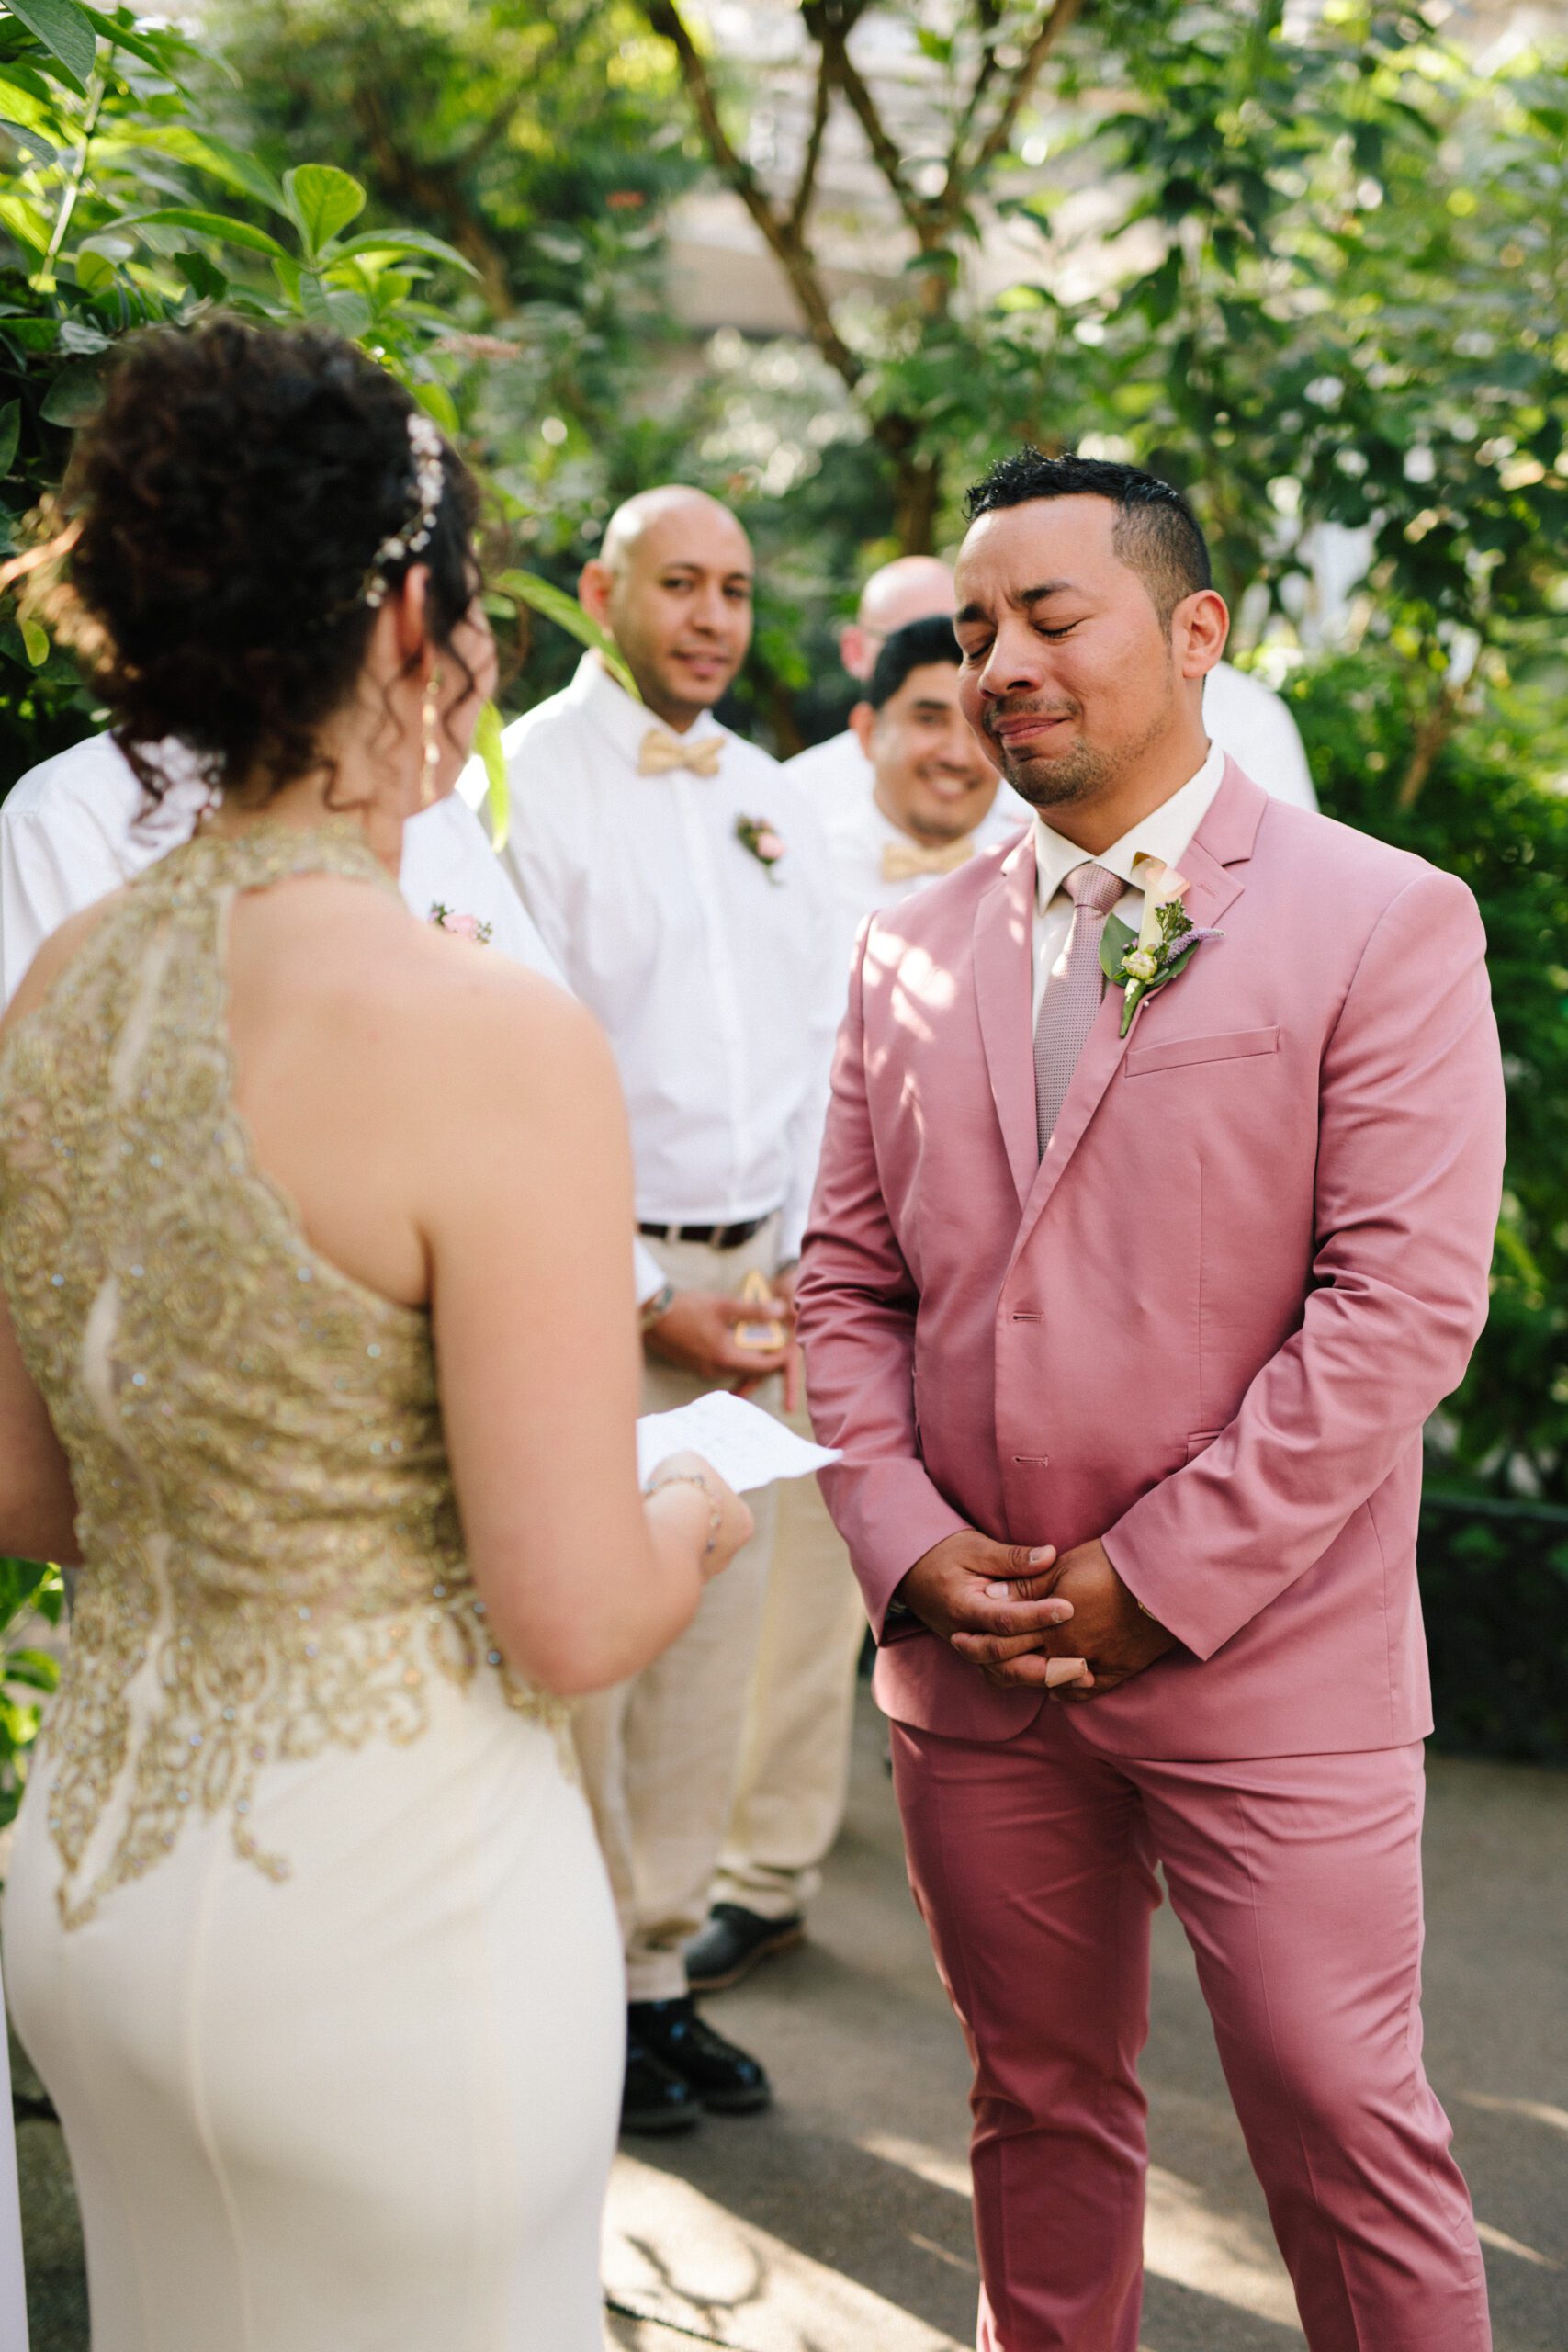 The groom getting emotional as his beautiful bride shares her vows during their ceremony at their Butterfly Pavilion wedding.